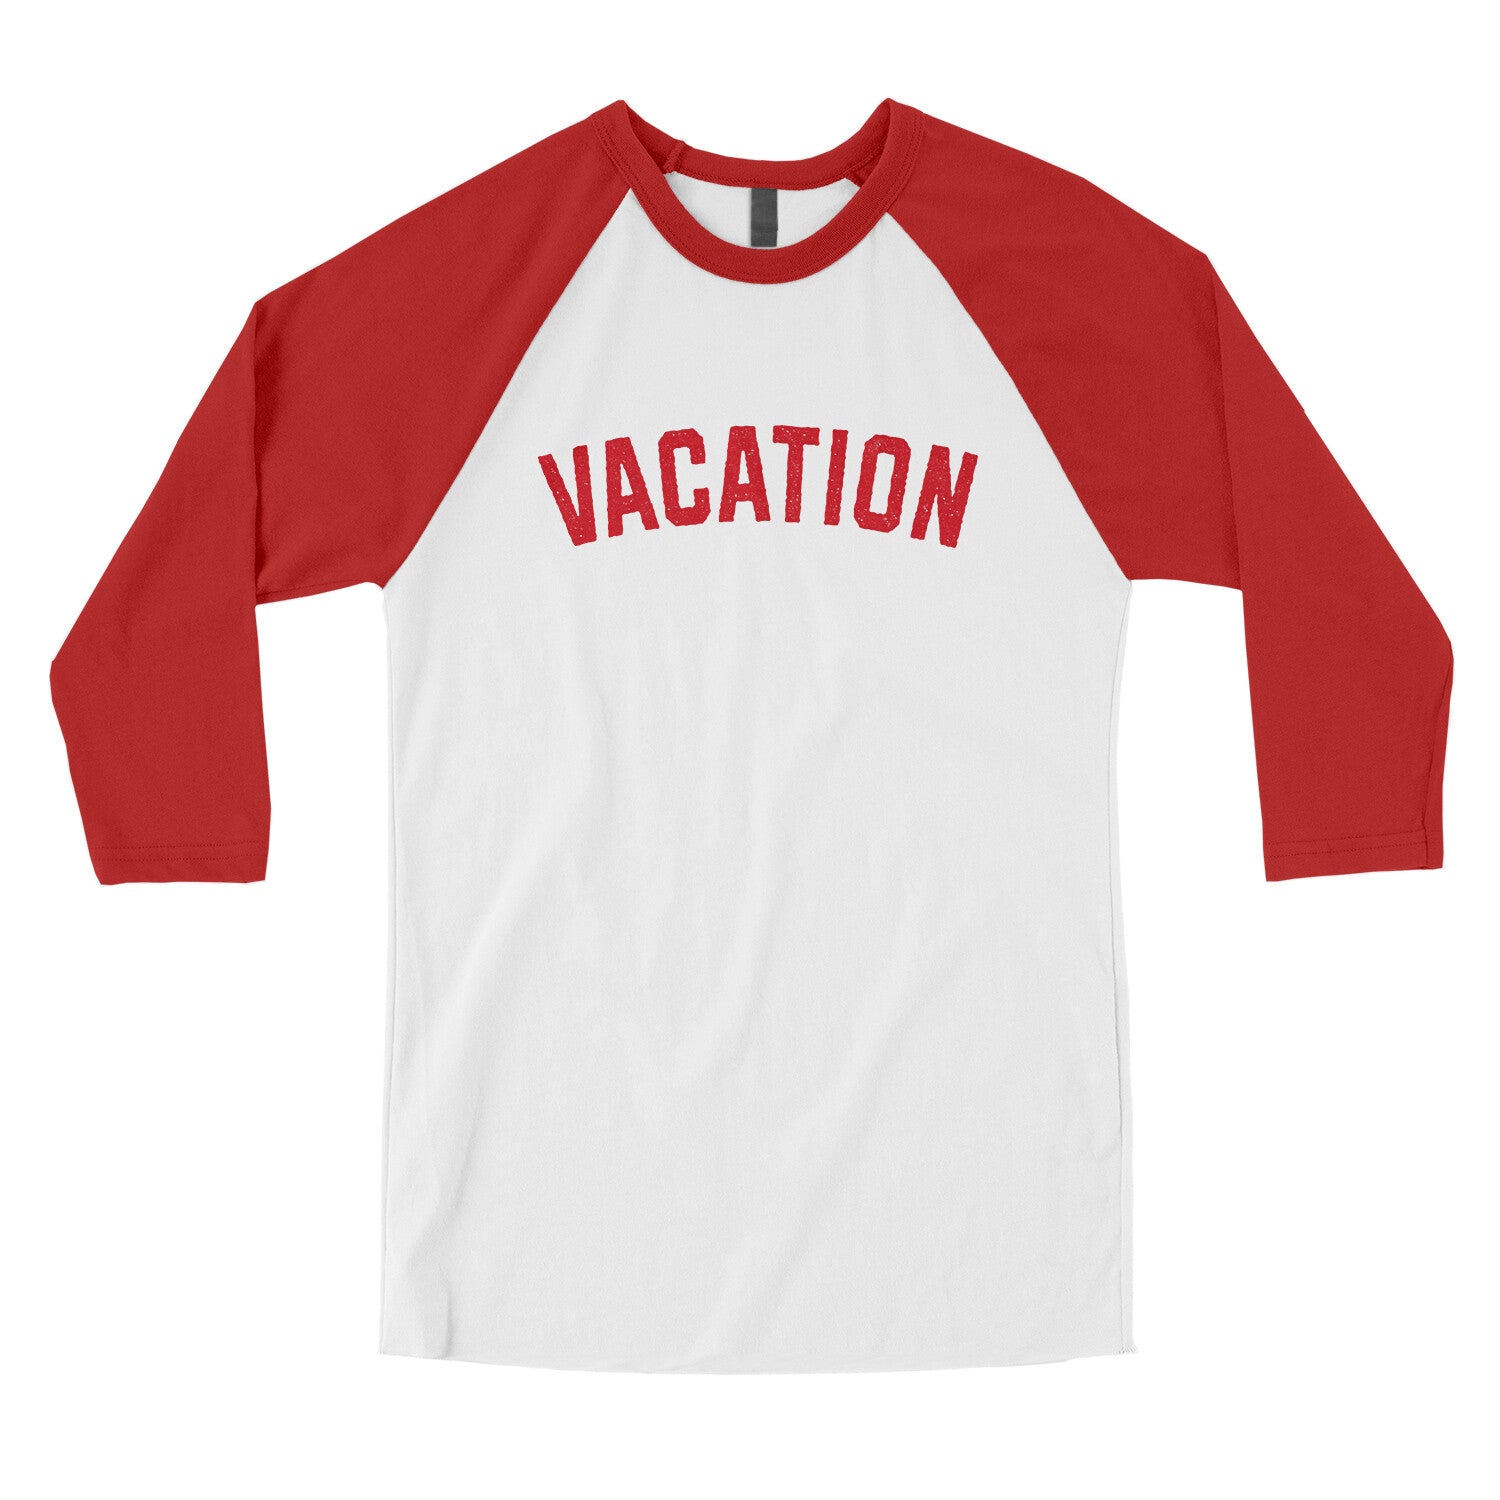 Vacation in White with Red Color